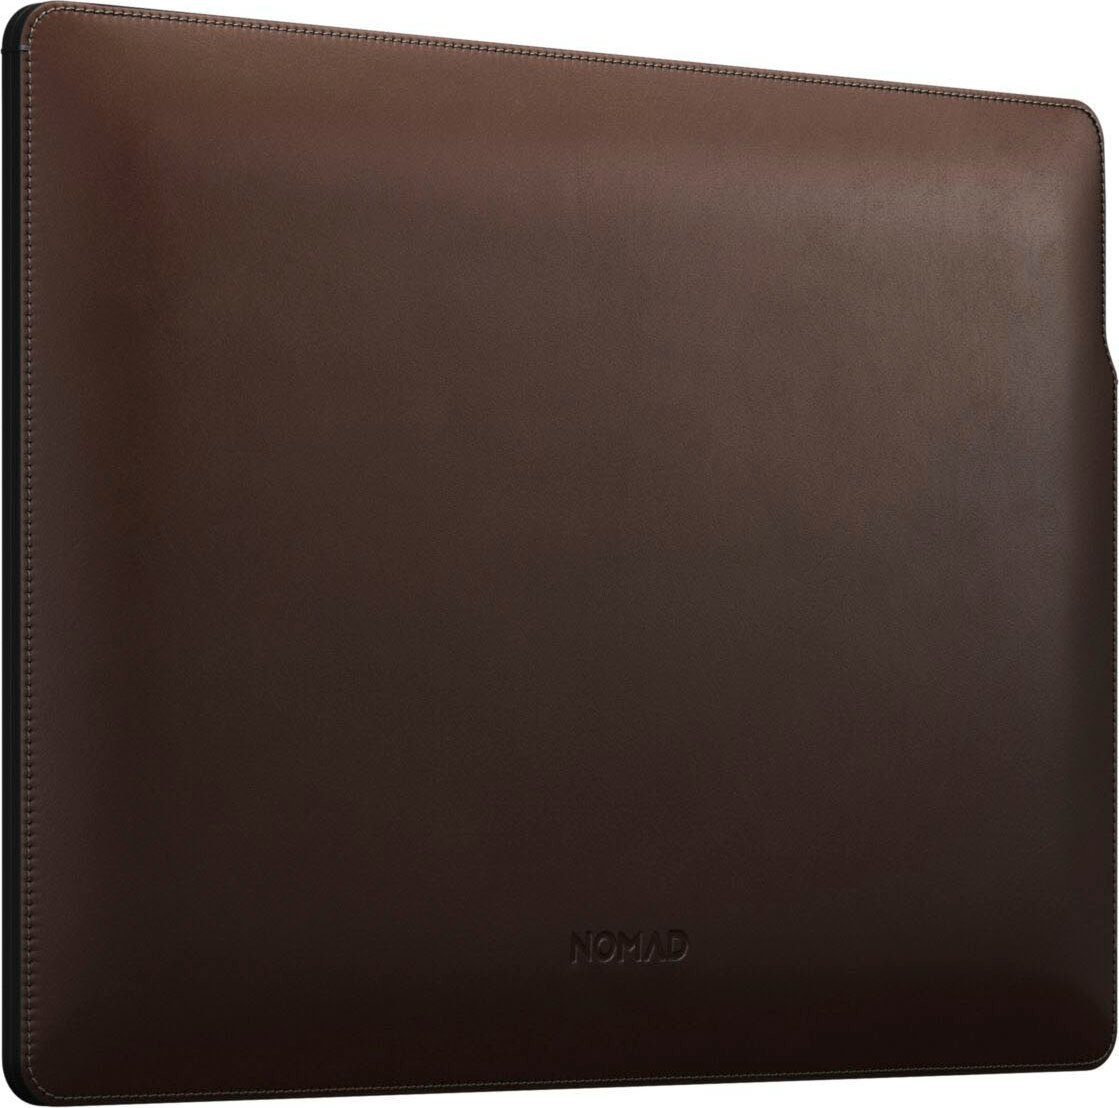 Nomad Laptop-Hülle MacBook Pro Sleeve Rustic Brown Leather 13-Inch 33 cm (13 Zoll) von Nomad